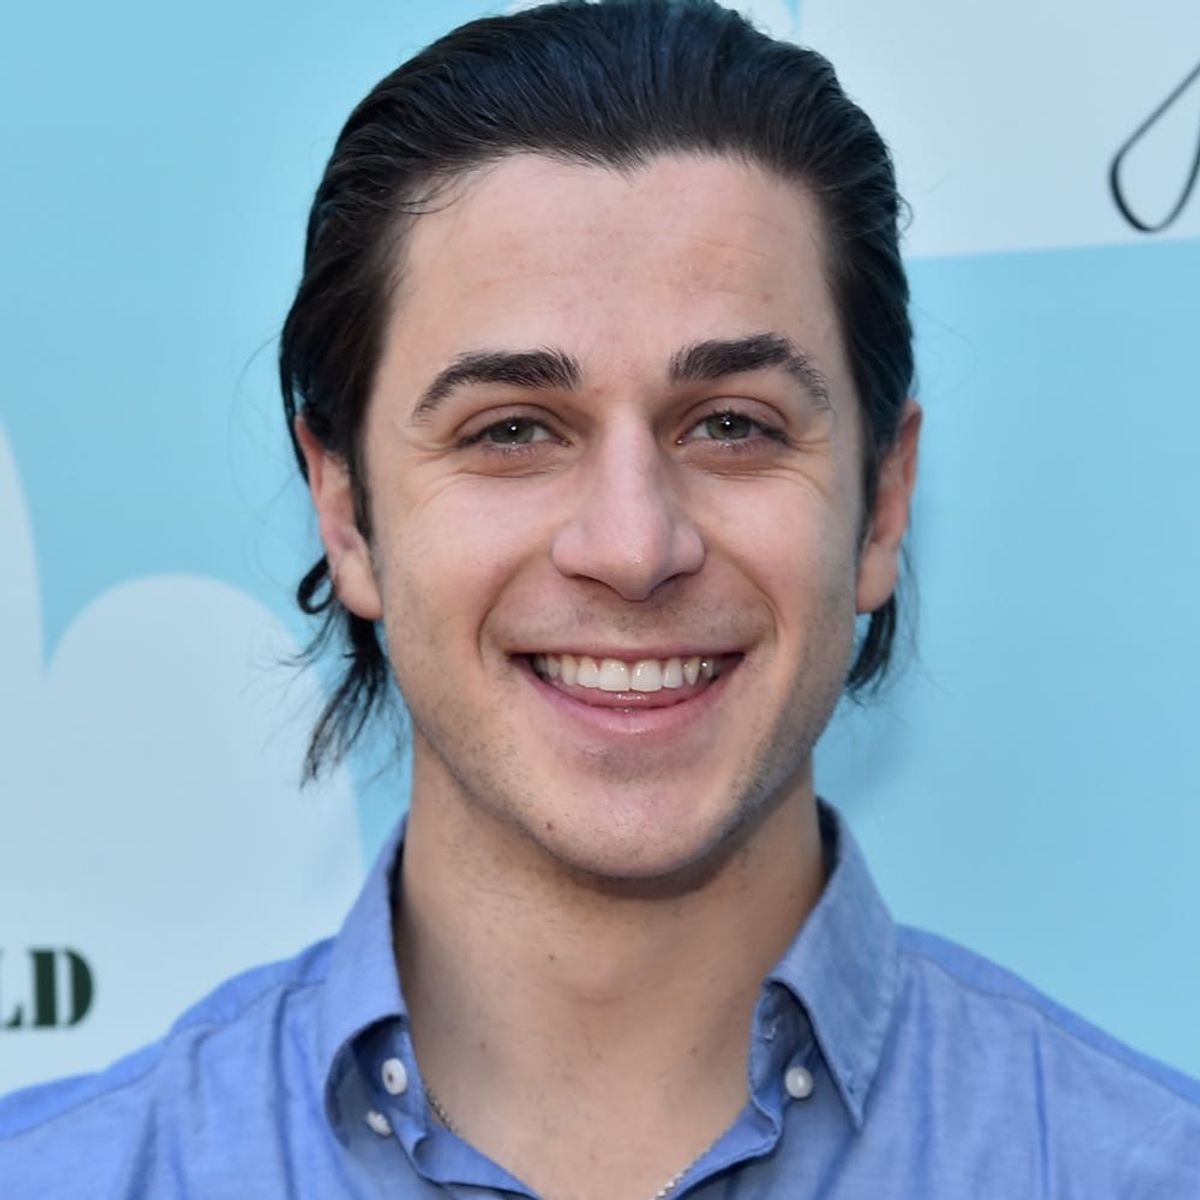 Disney Alum David Henrie and Wife Maria Cahill Welcome a Baby Girl After 3 Miscarriages